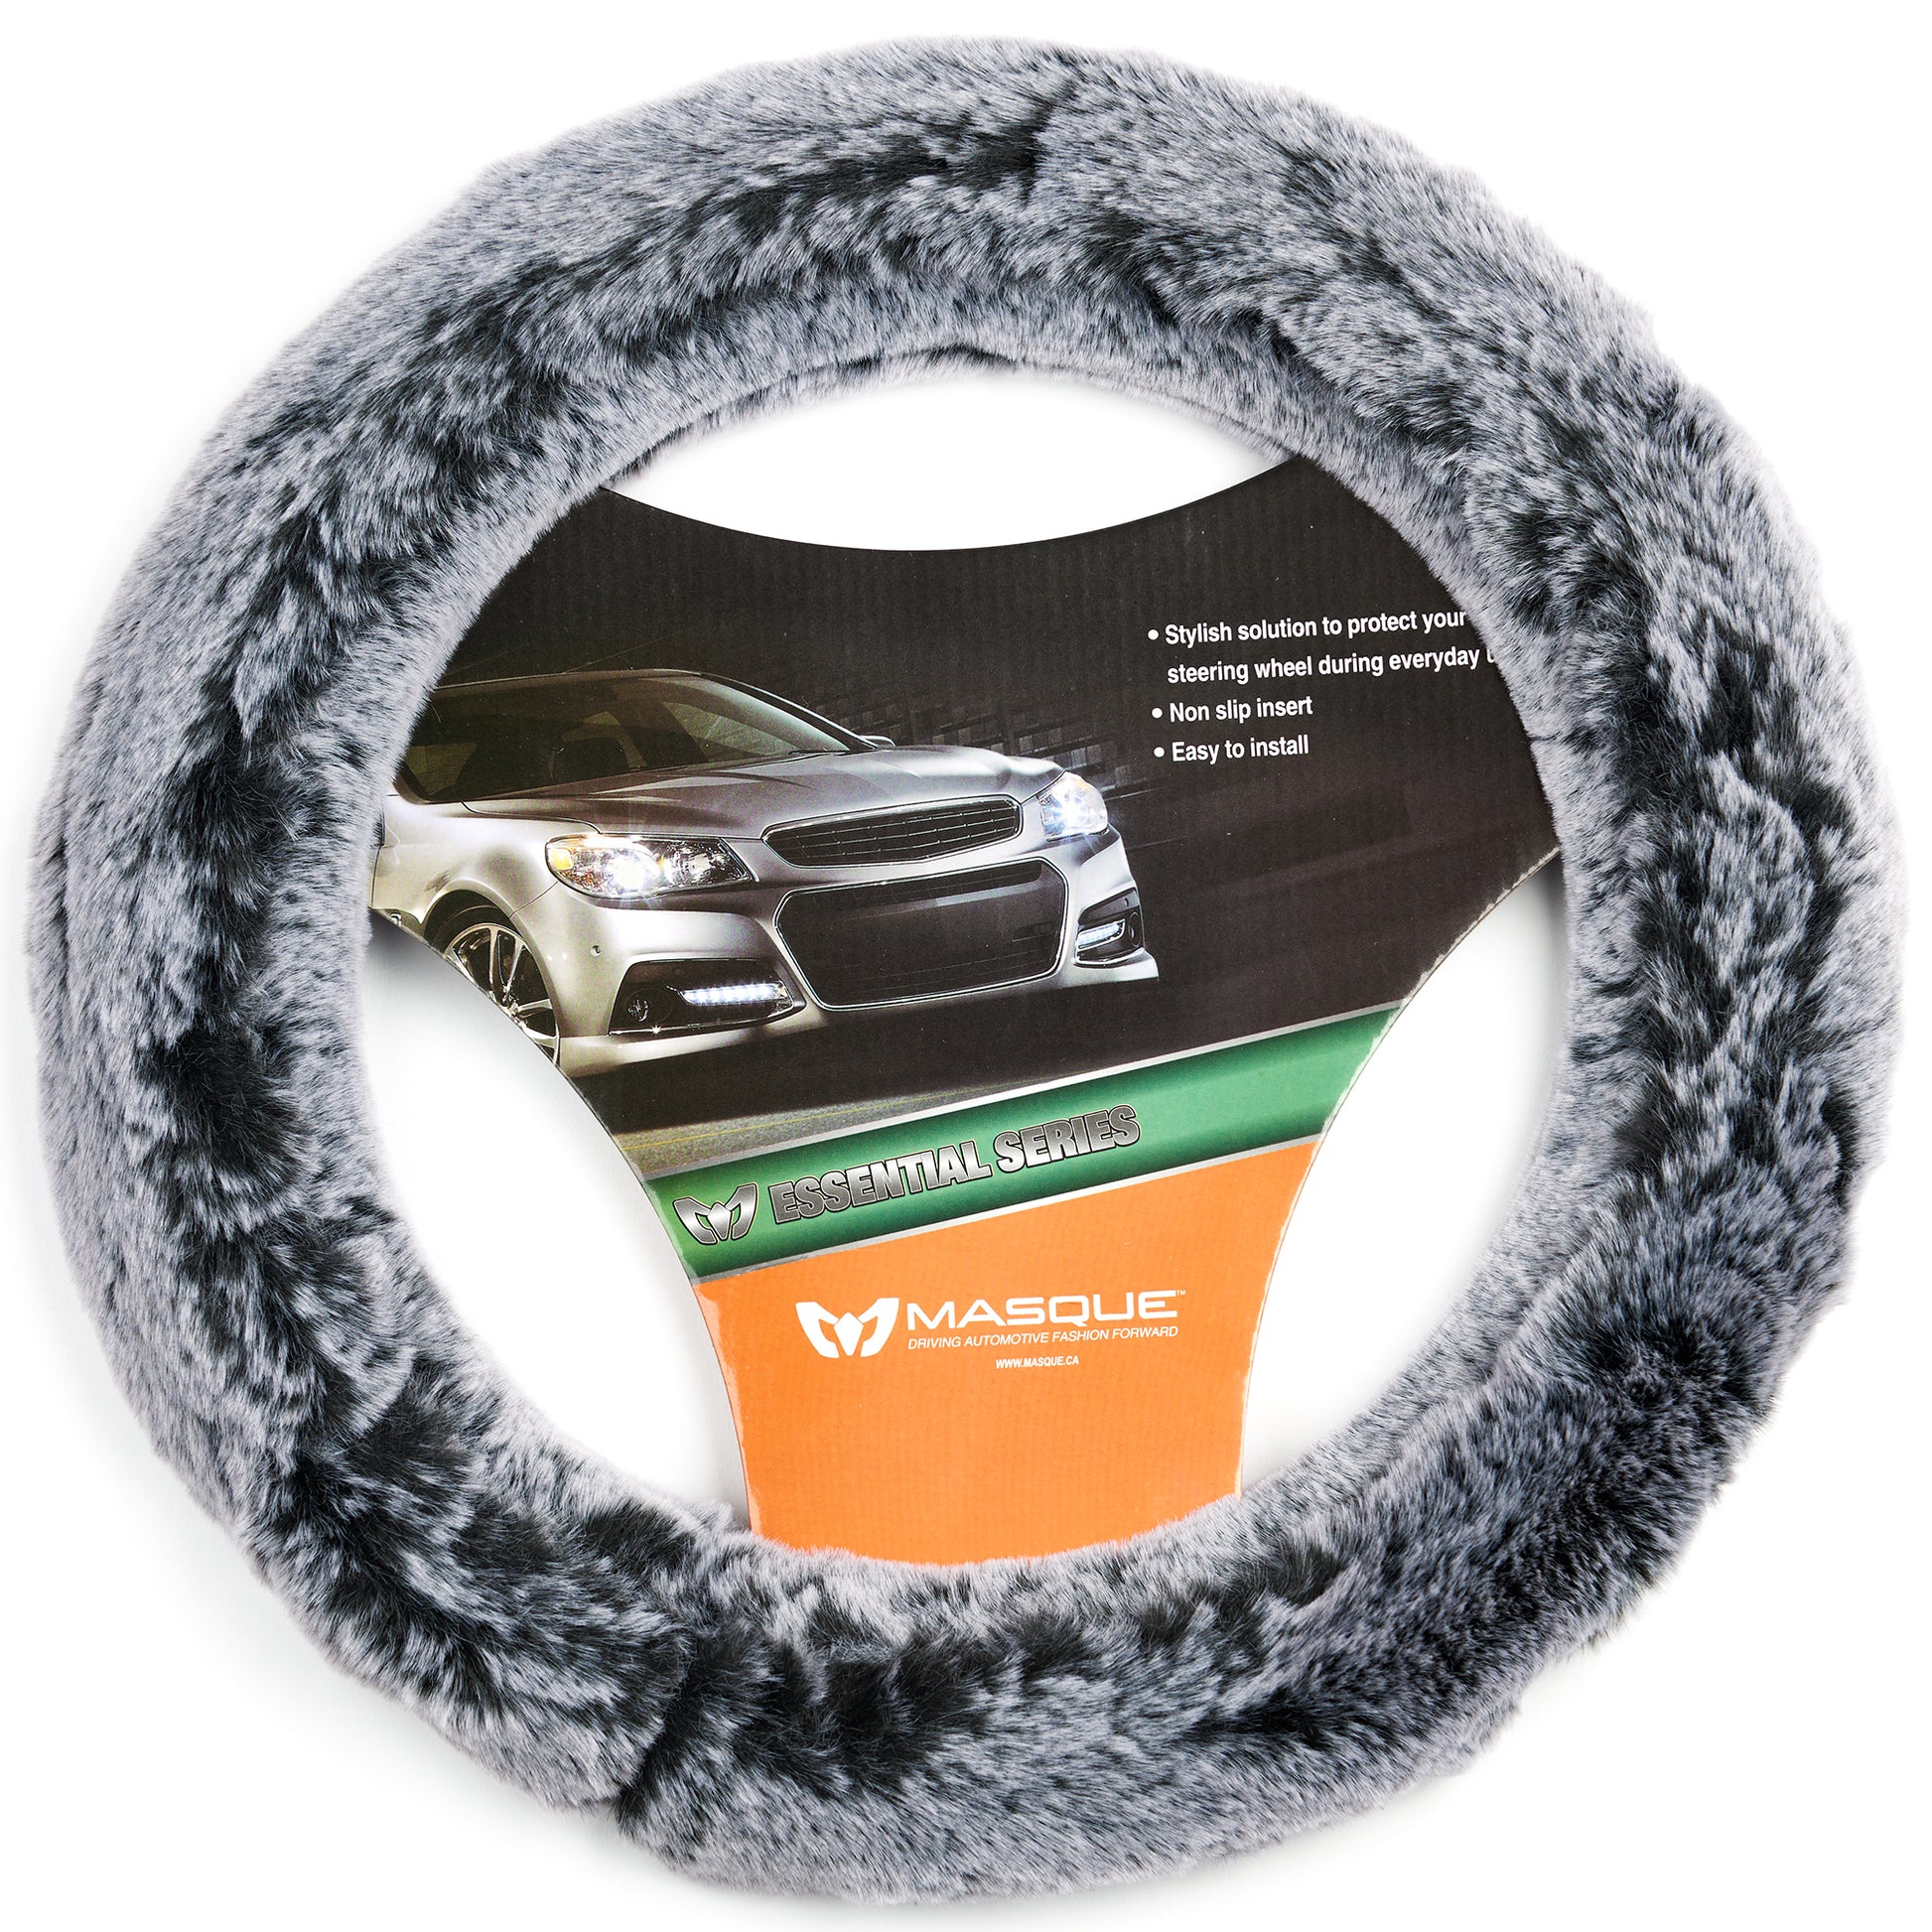 Masque Black and Gray 2 Tone Furry Steering Wheel Cover at AutoZone